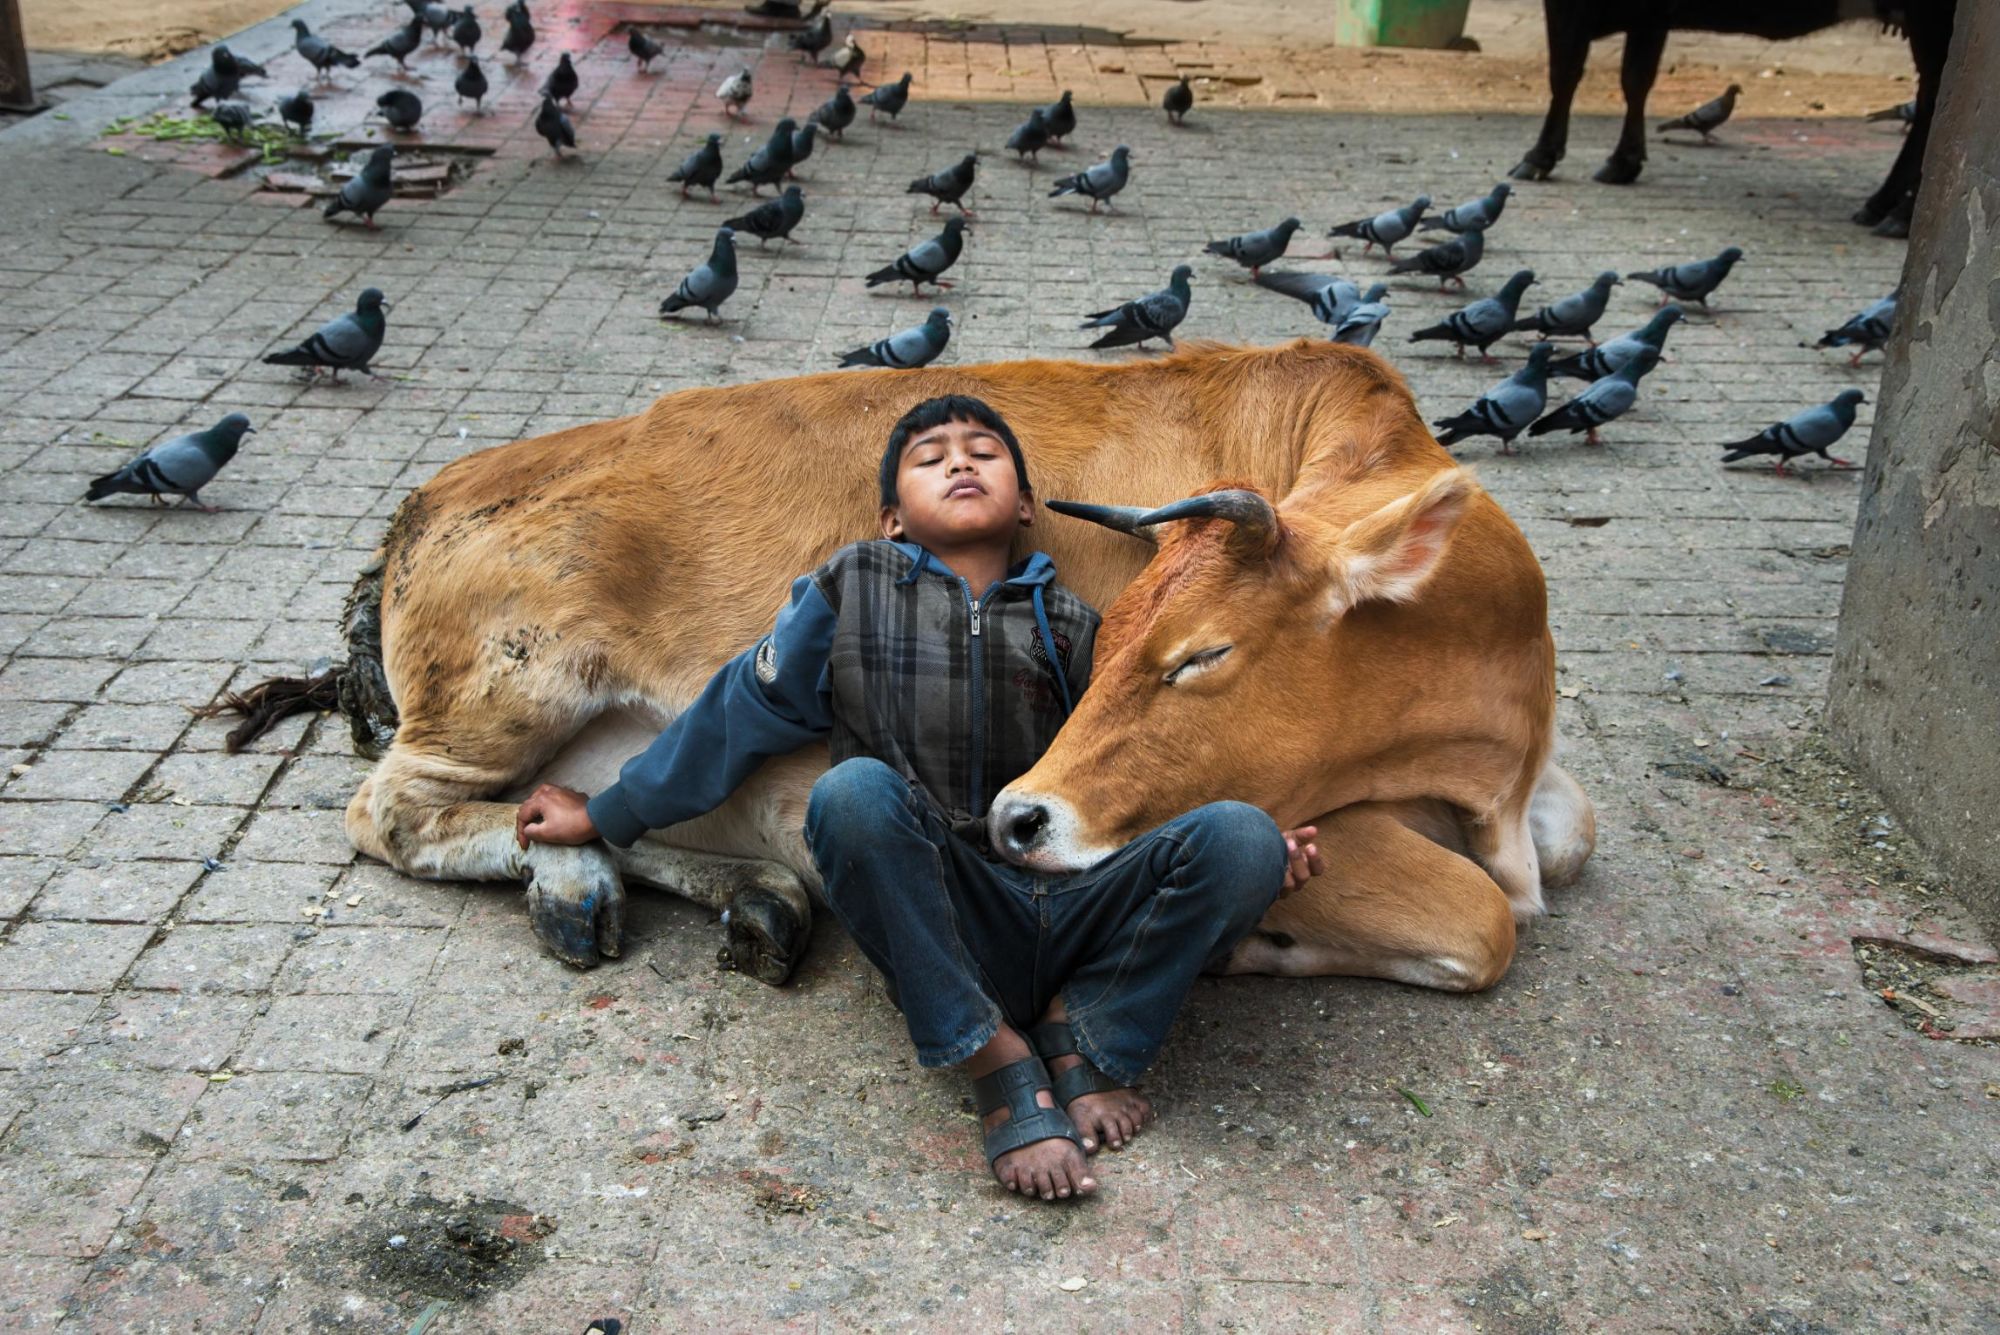 Steve McCurry's photos show the complex relationship between